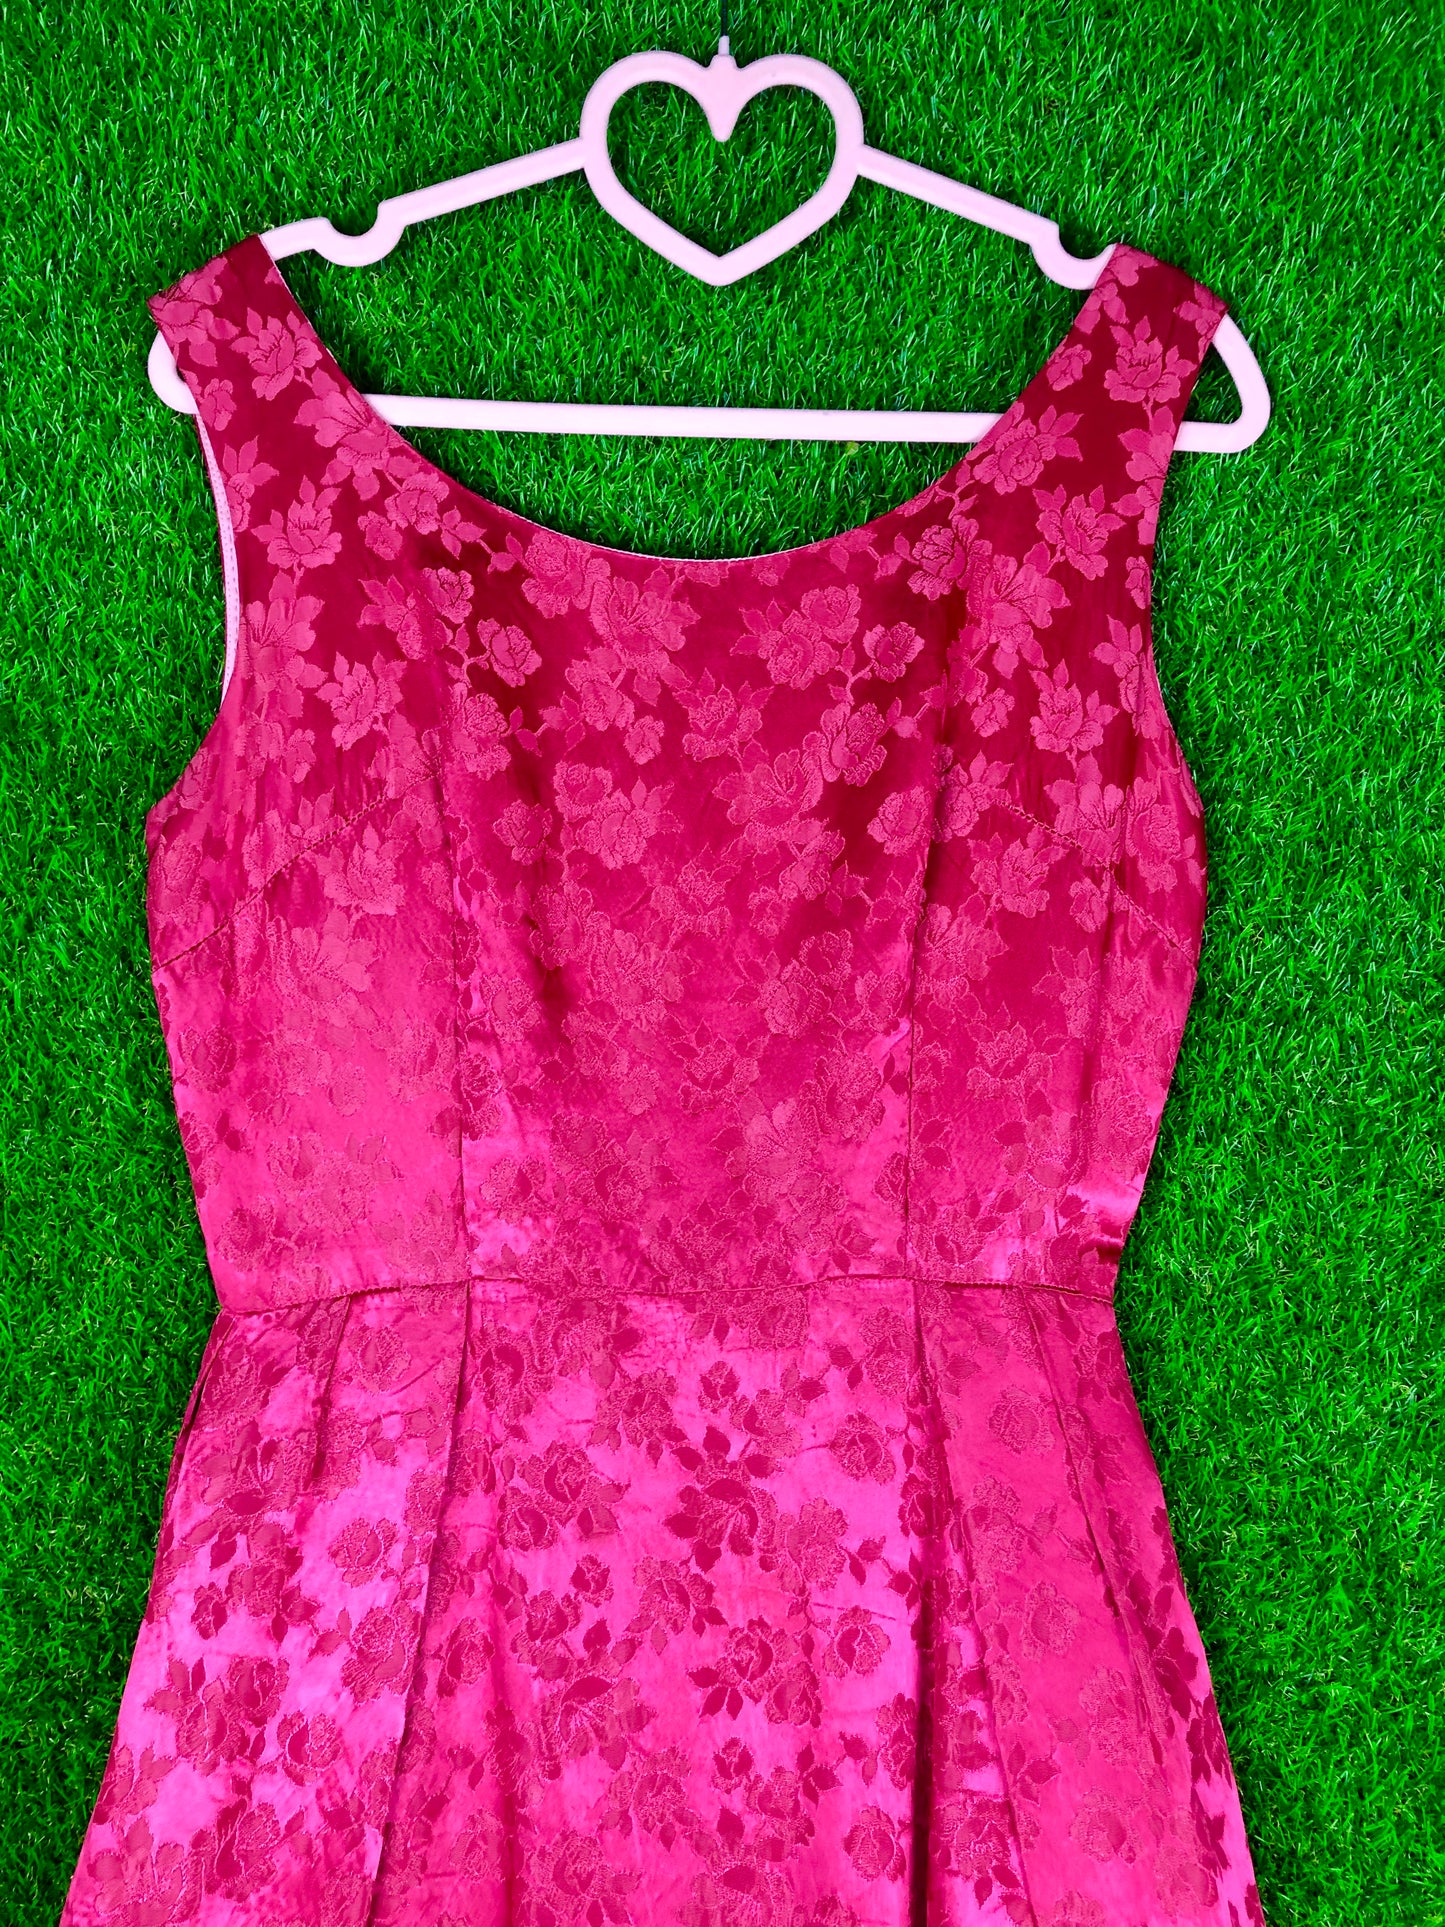 1960's Fuchsia Pink Pleated Party Dress